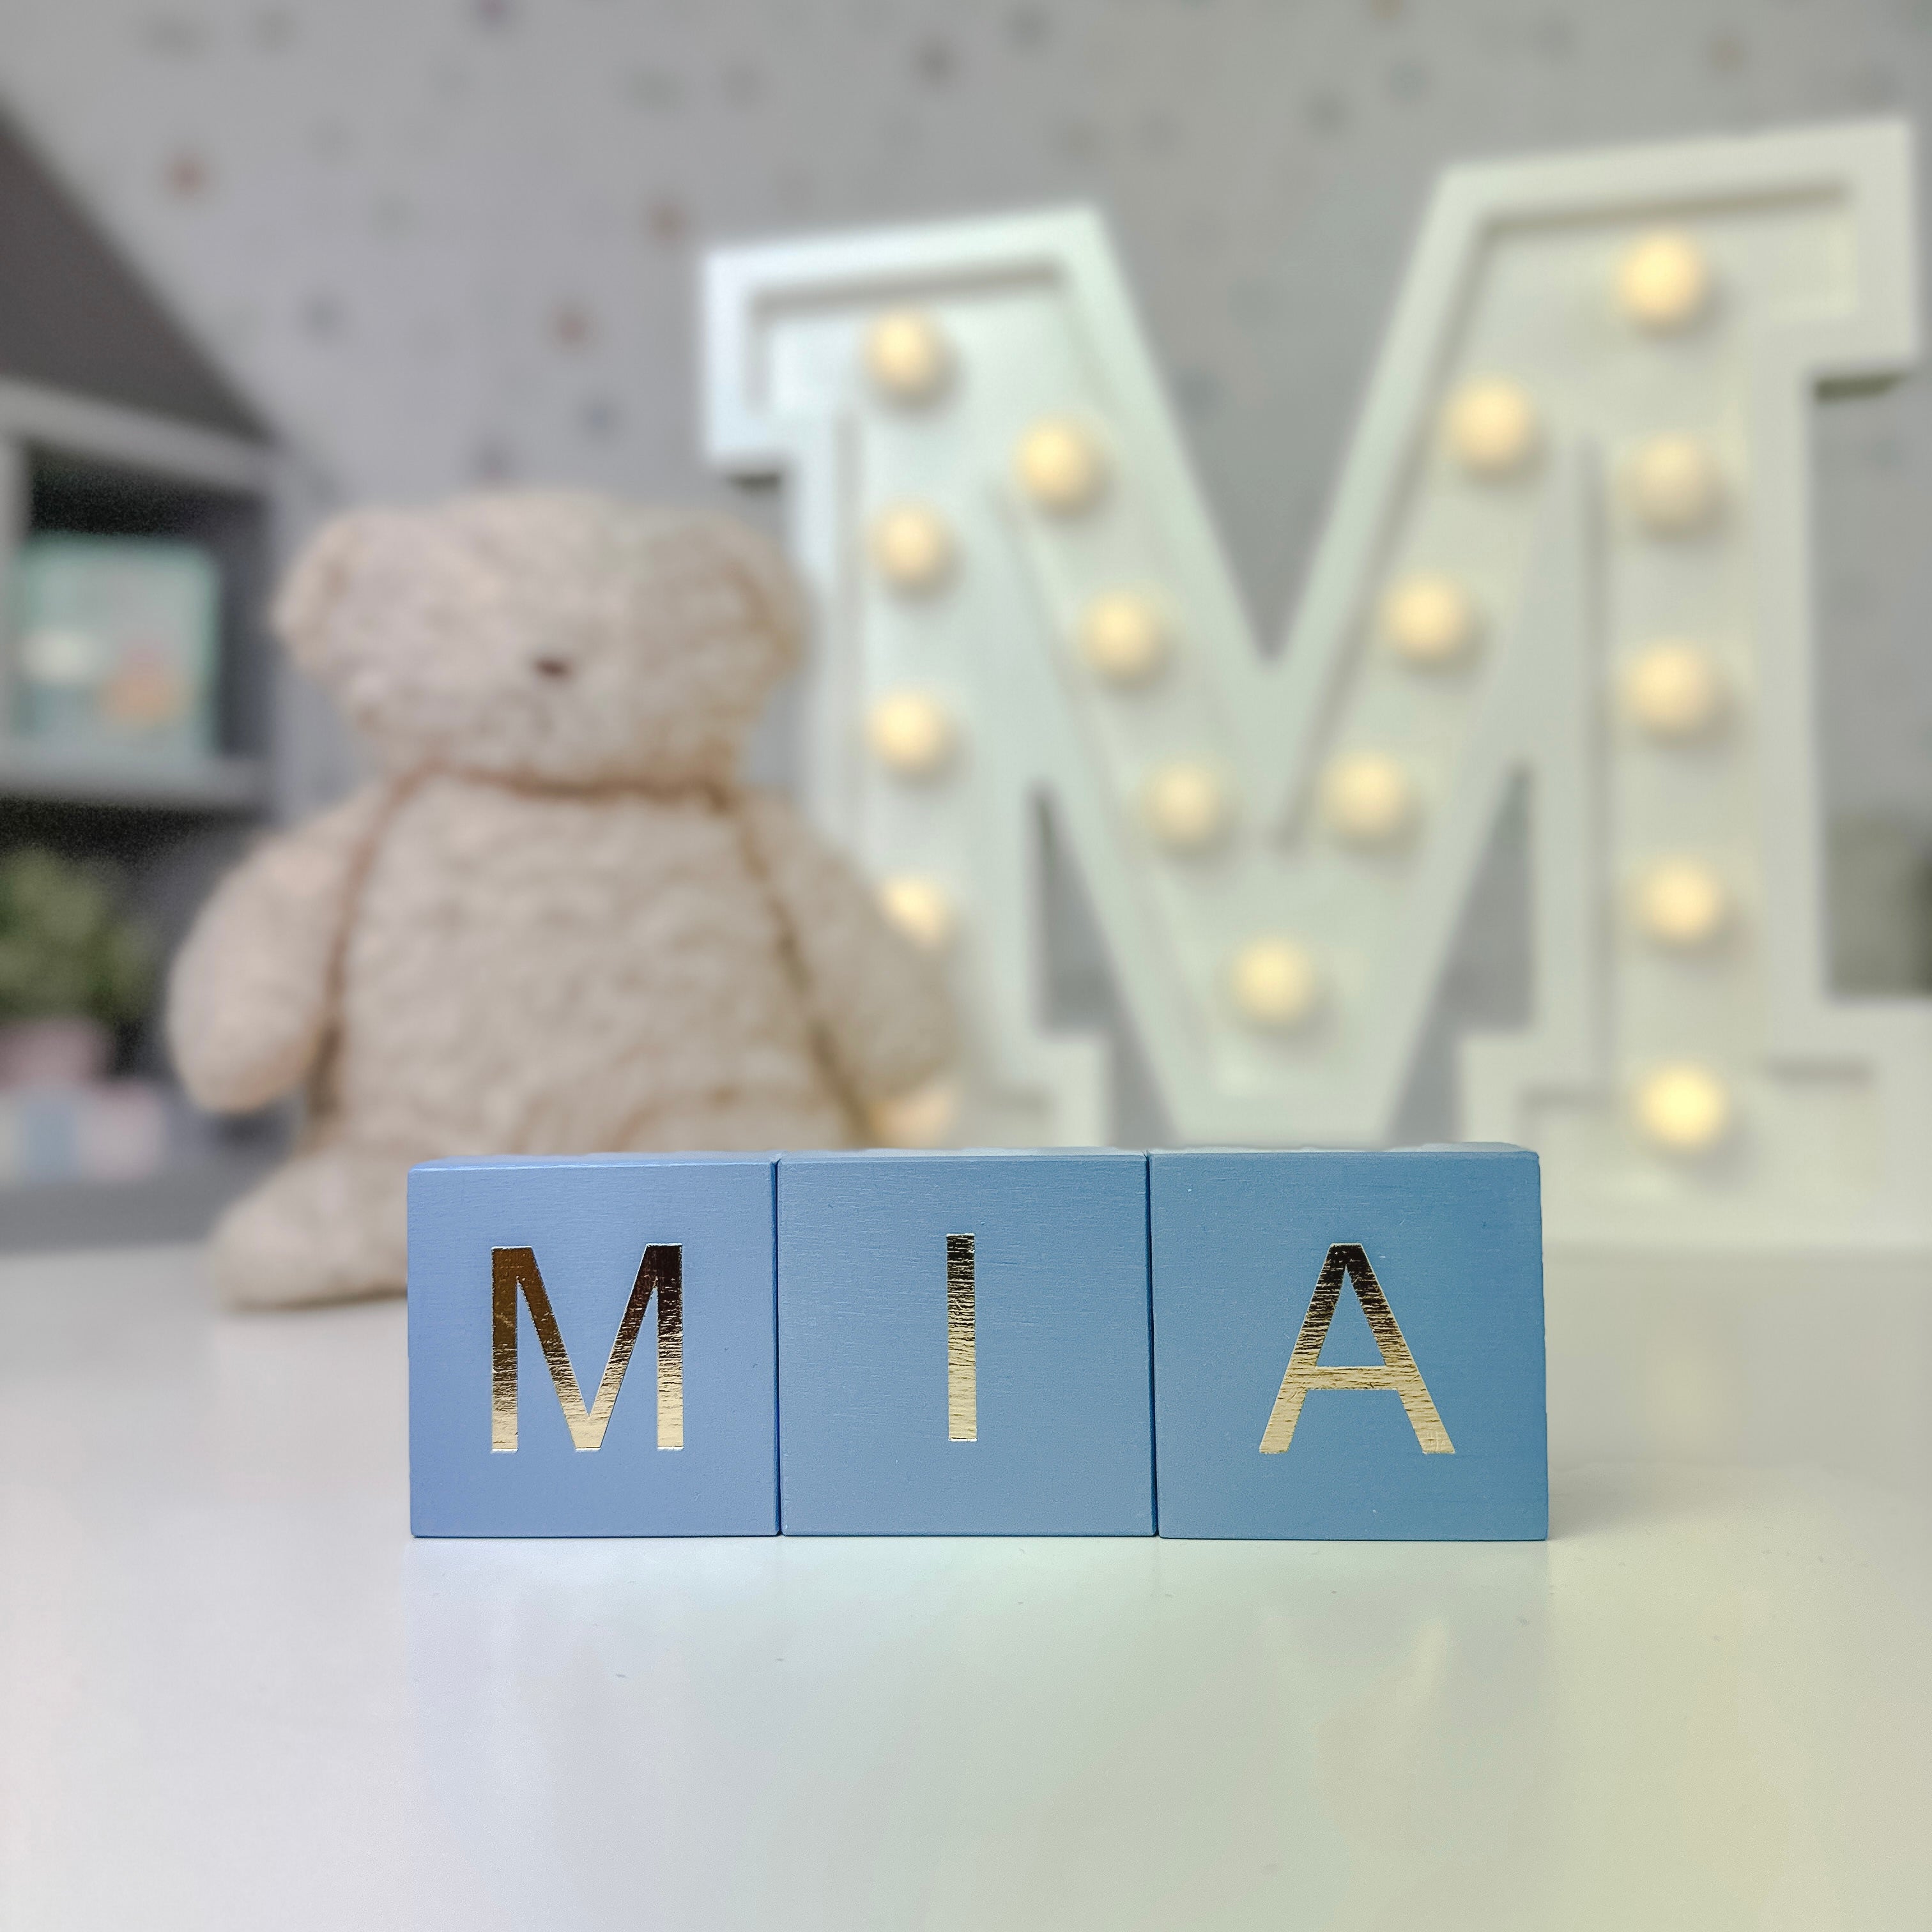 WOODEN BLOCK WITH LETTER - BLUE